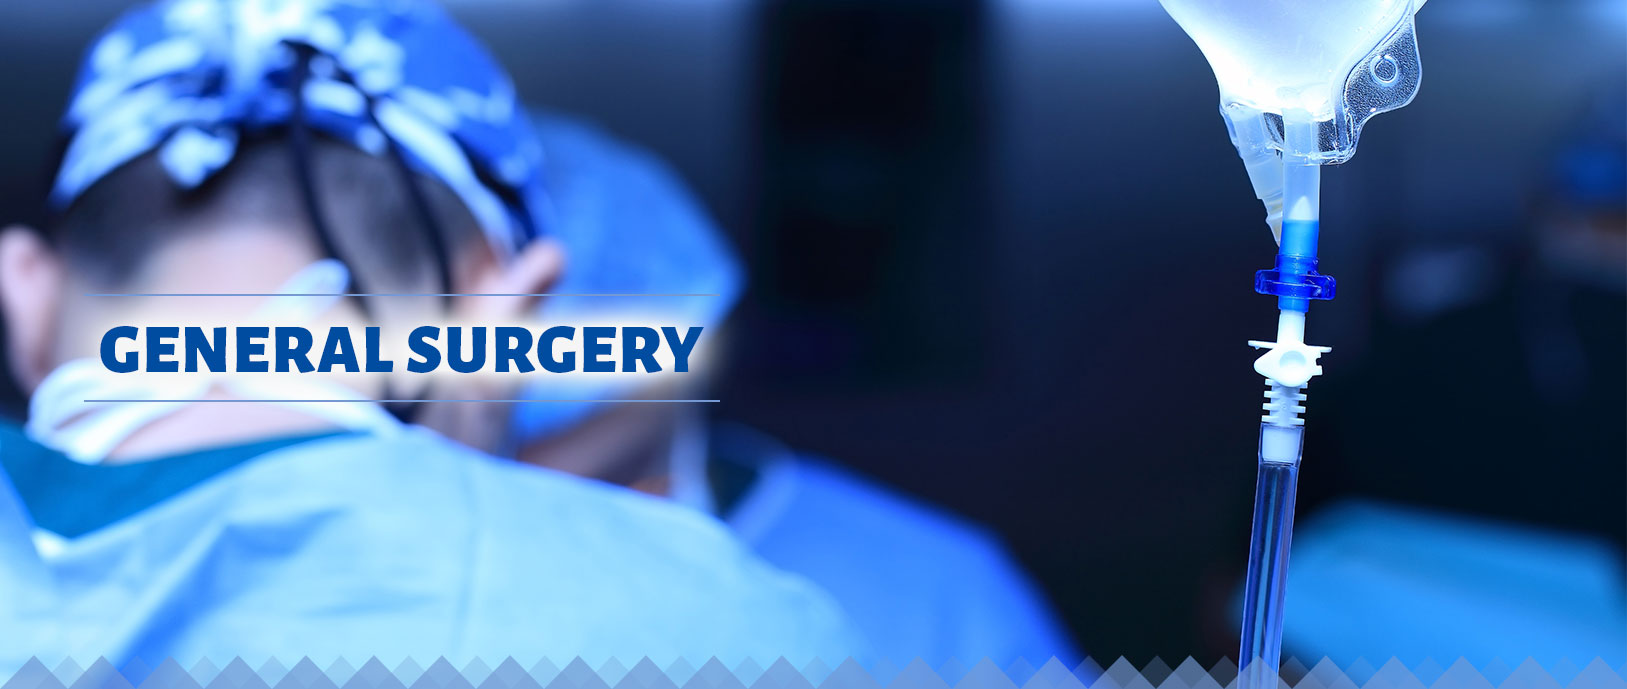 General surgery: a background image of two surgical nurses fully dressed in proper surgical attire, a cap, mask, and operating gown.